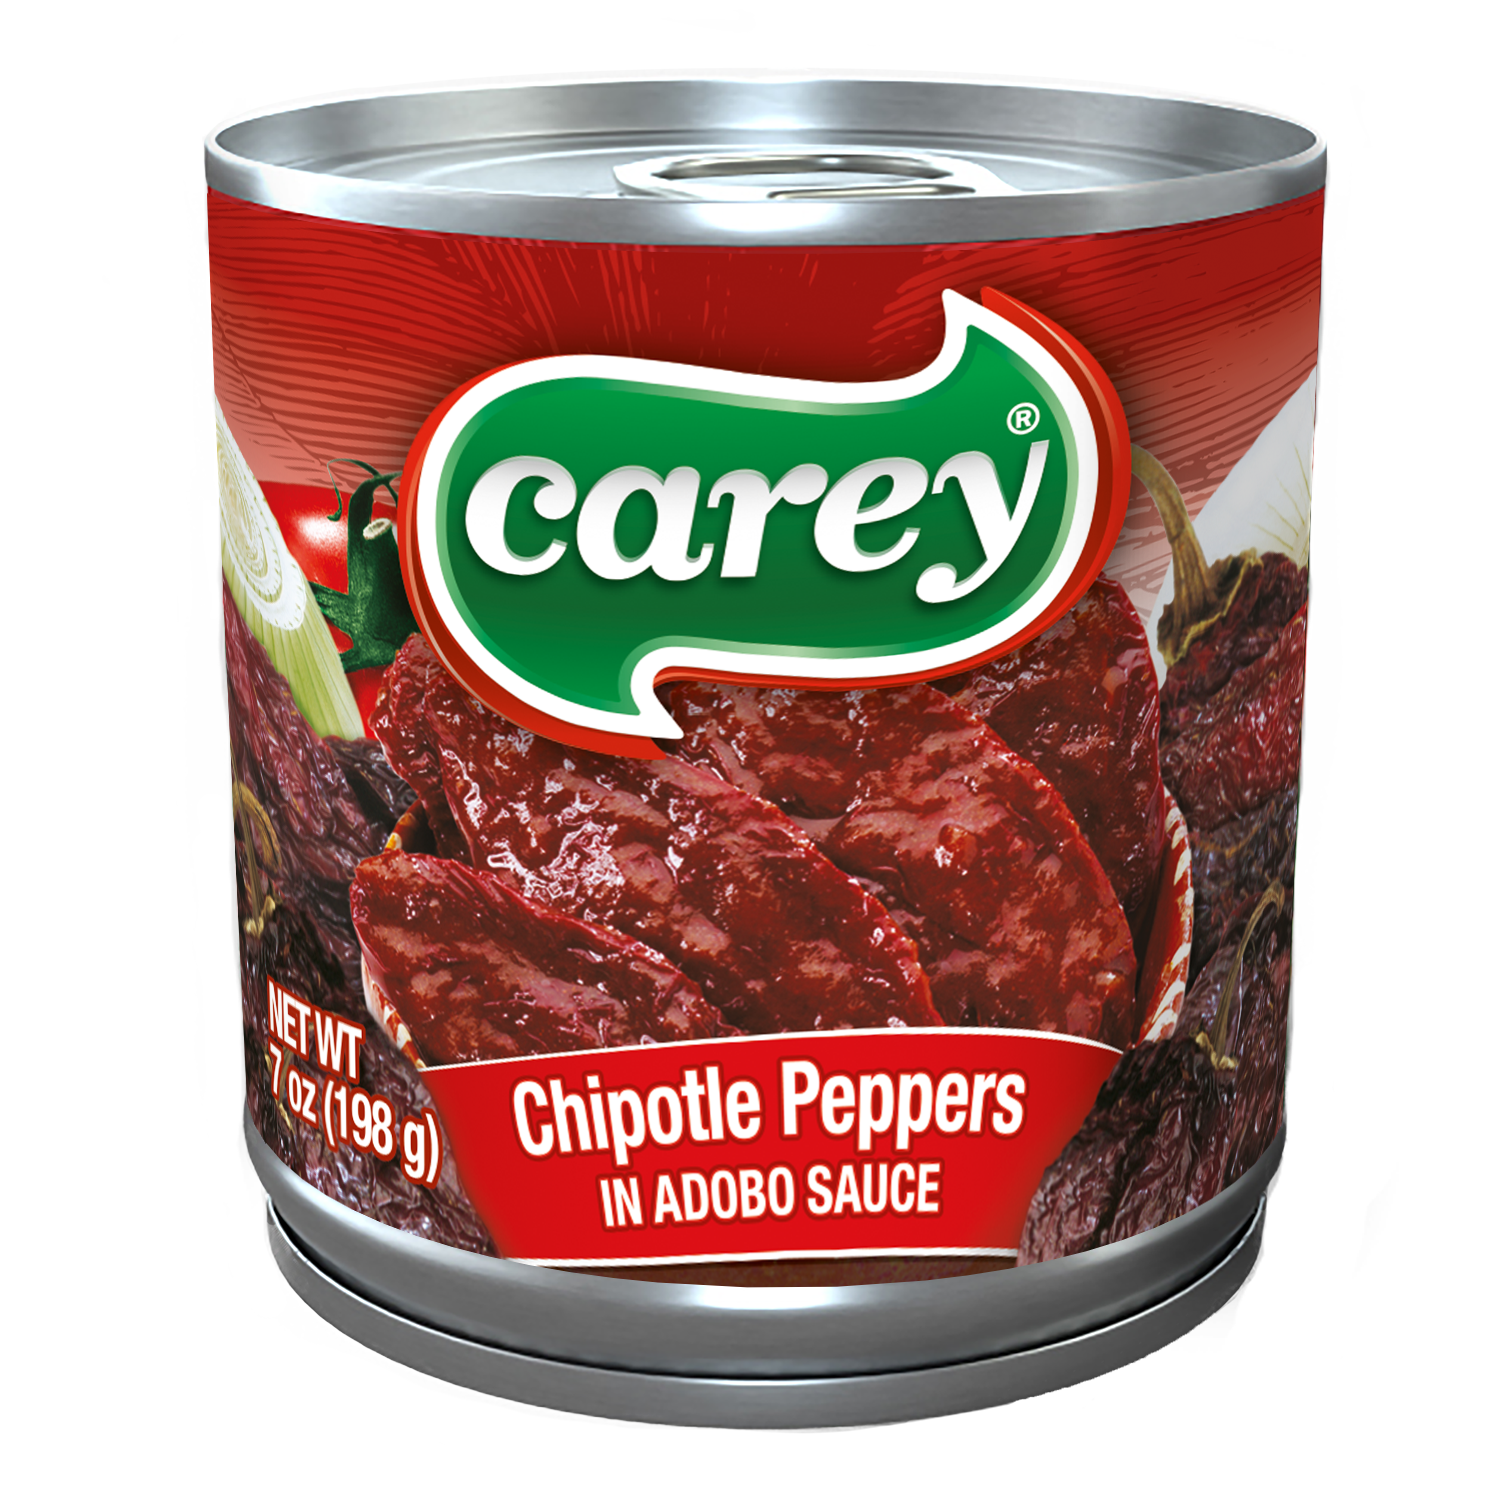 Chipotle Peppers in Adobo Sauce 198 GR